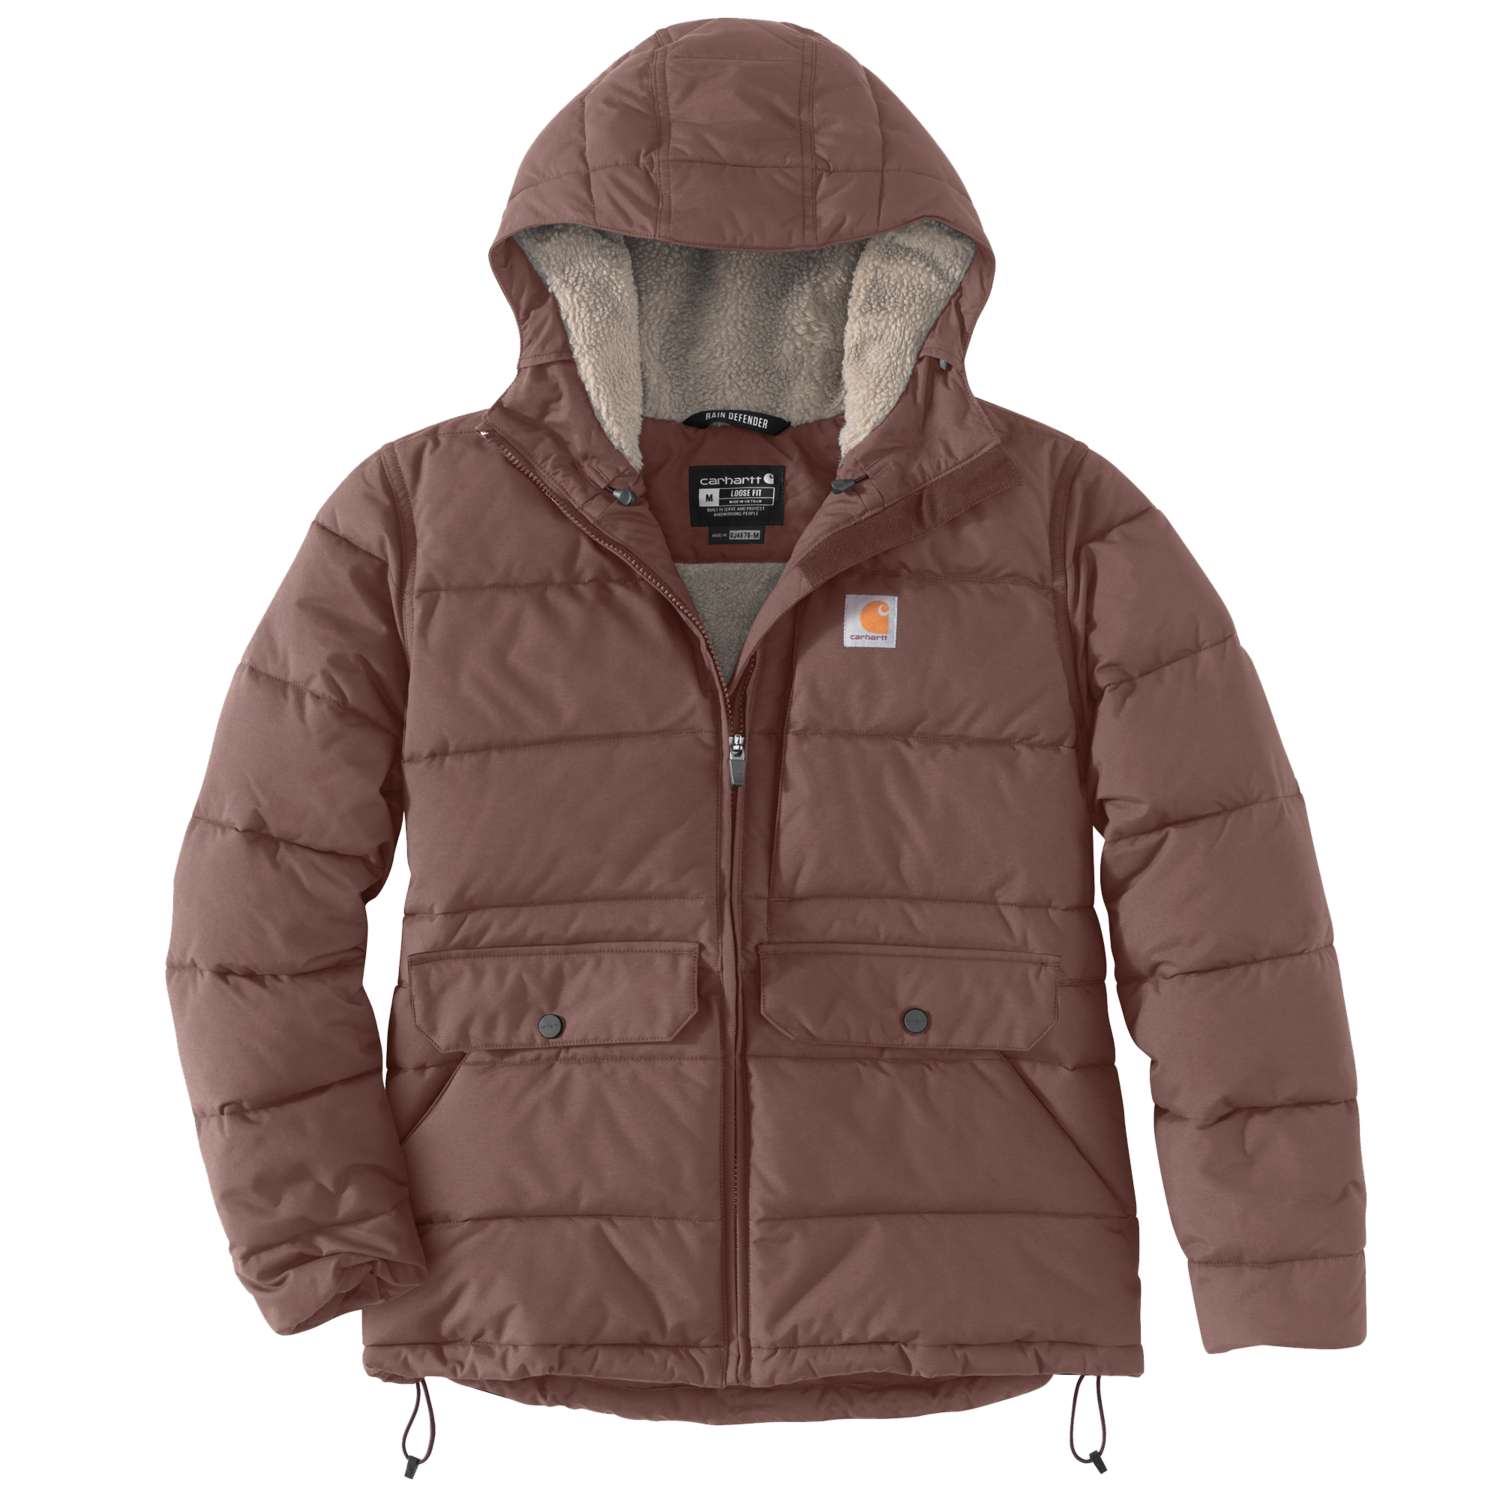 Carhartt Insulated Jacket With Water Repellent Finish And Wind Fighter ...